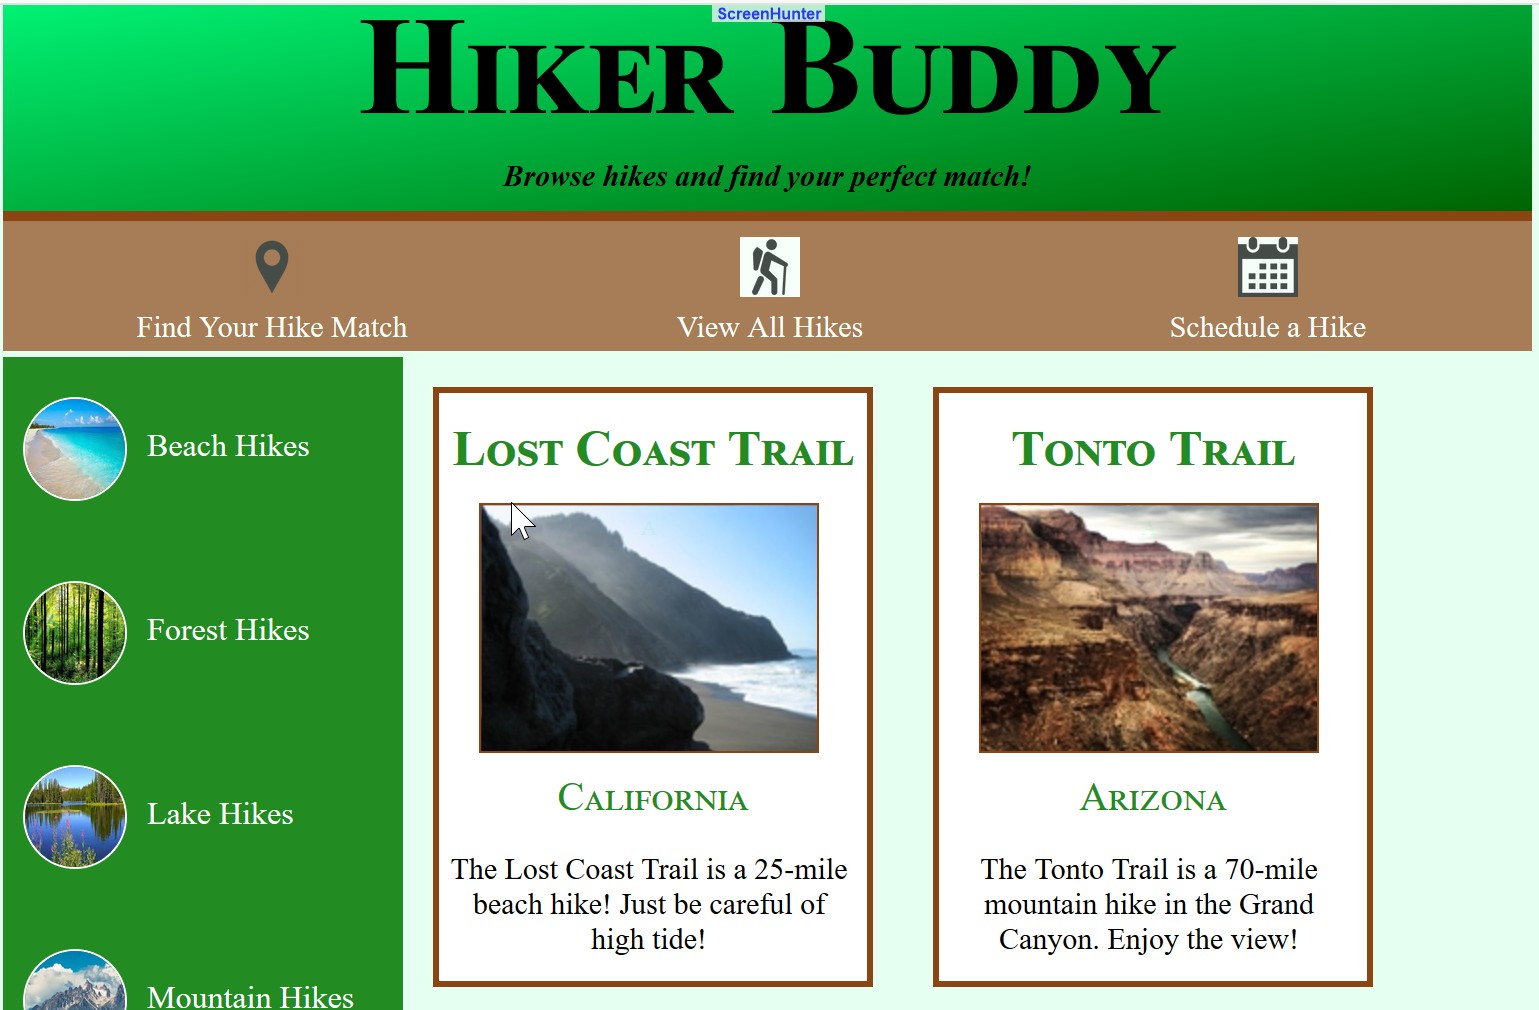 Cool hike locations